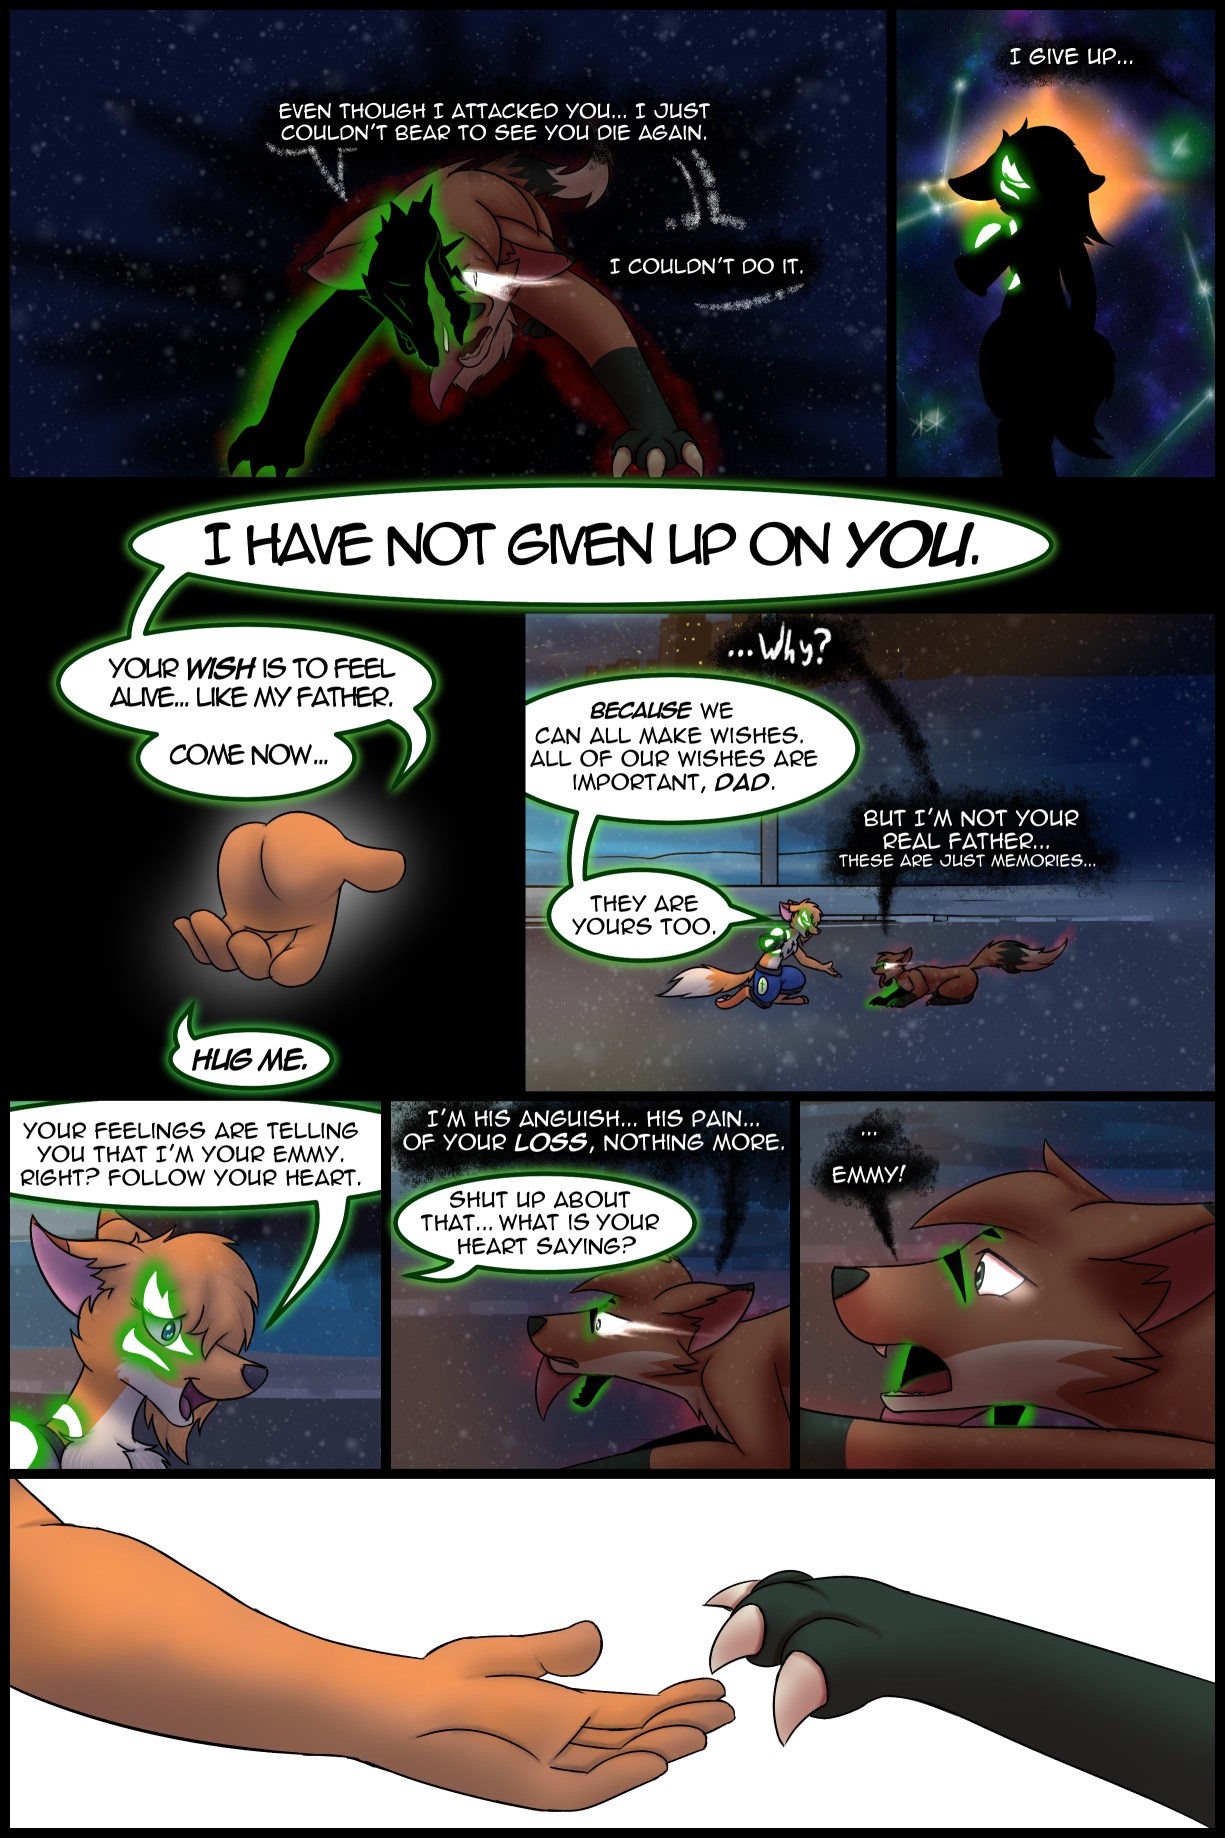 Ch3 Page 55 – What is YOUR Wish?